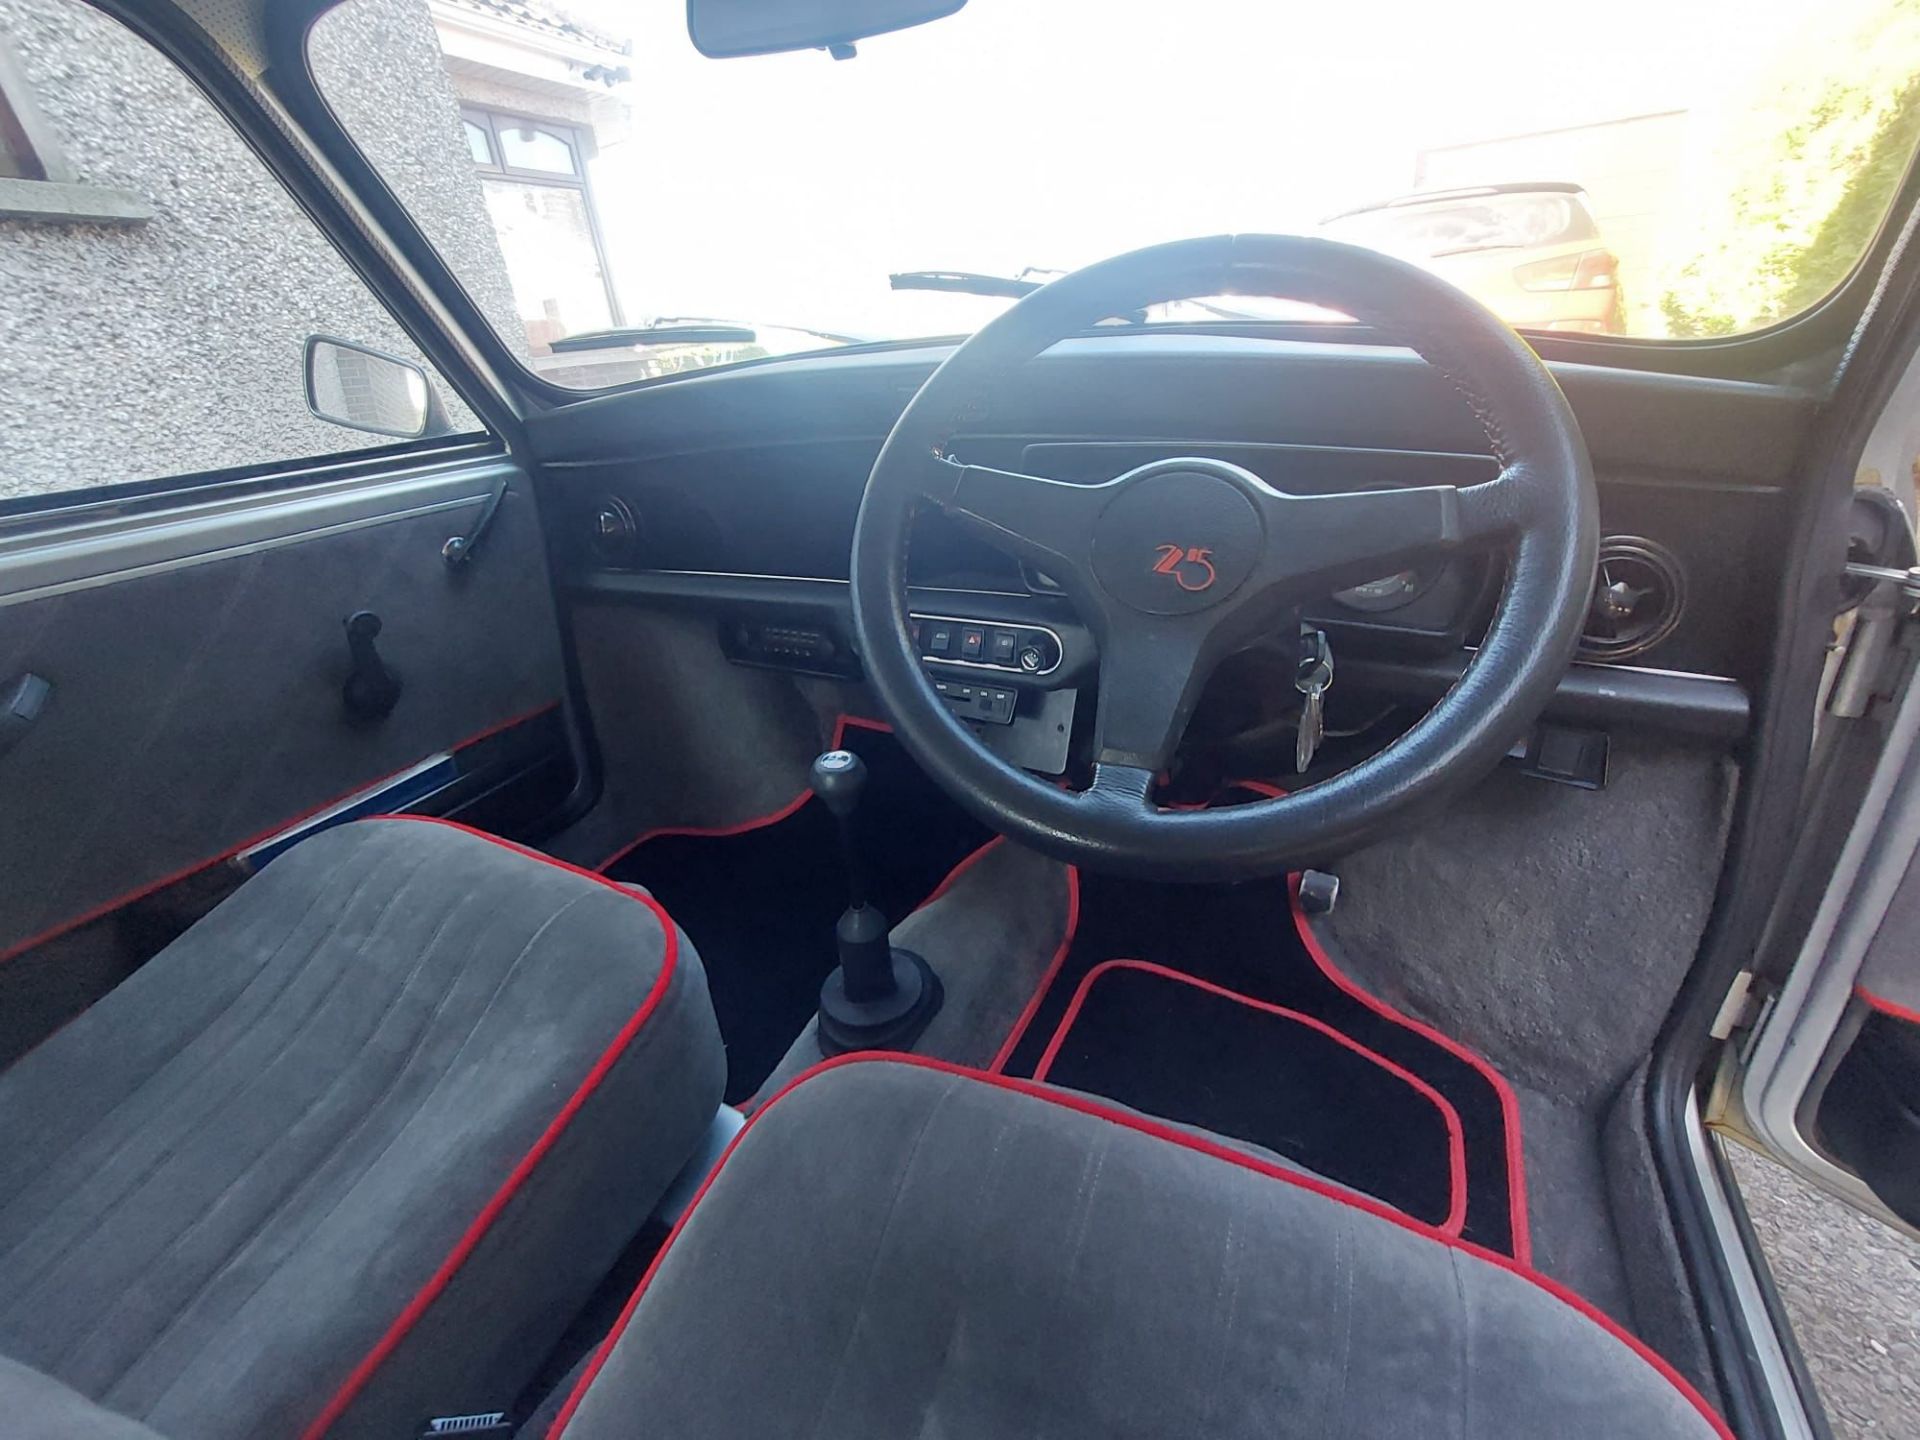 1984 Mini 25 - Only 39.9 miles from new - Image 21 of 52